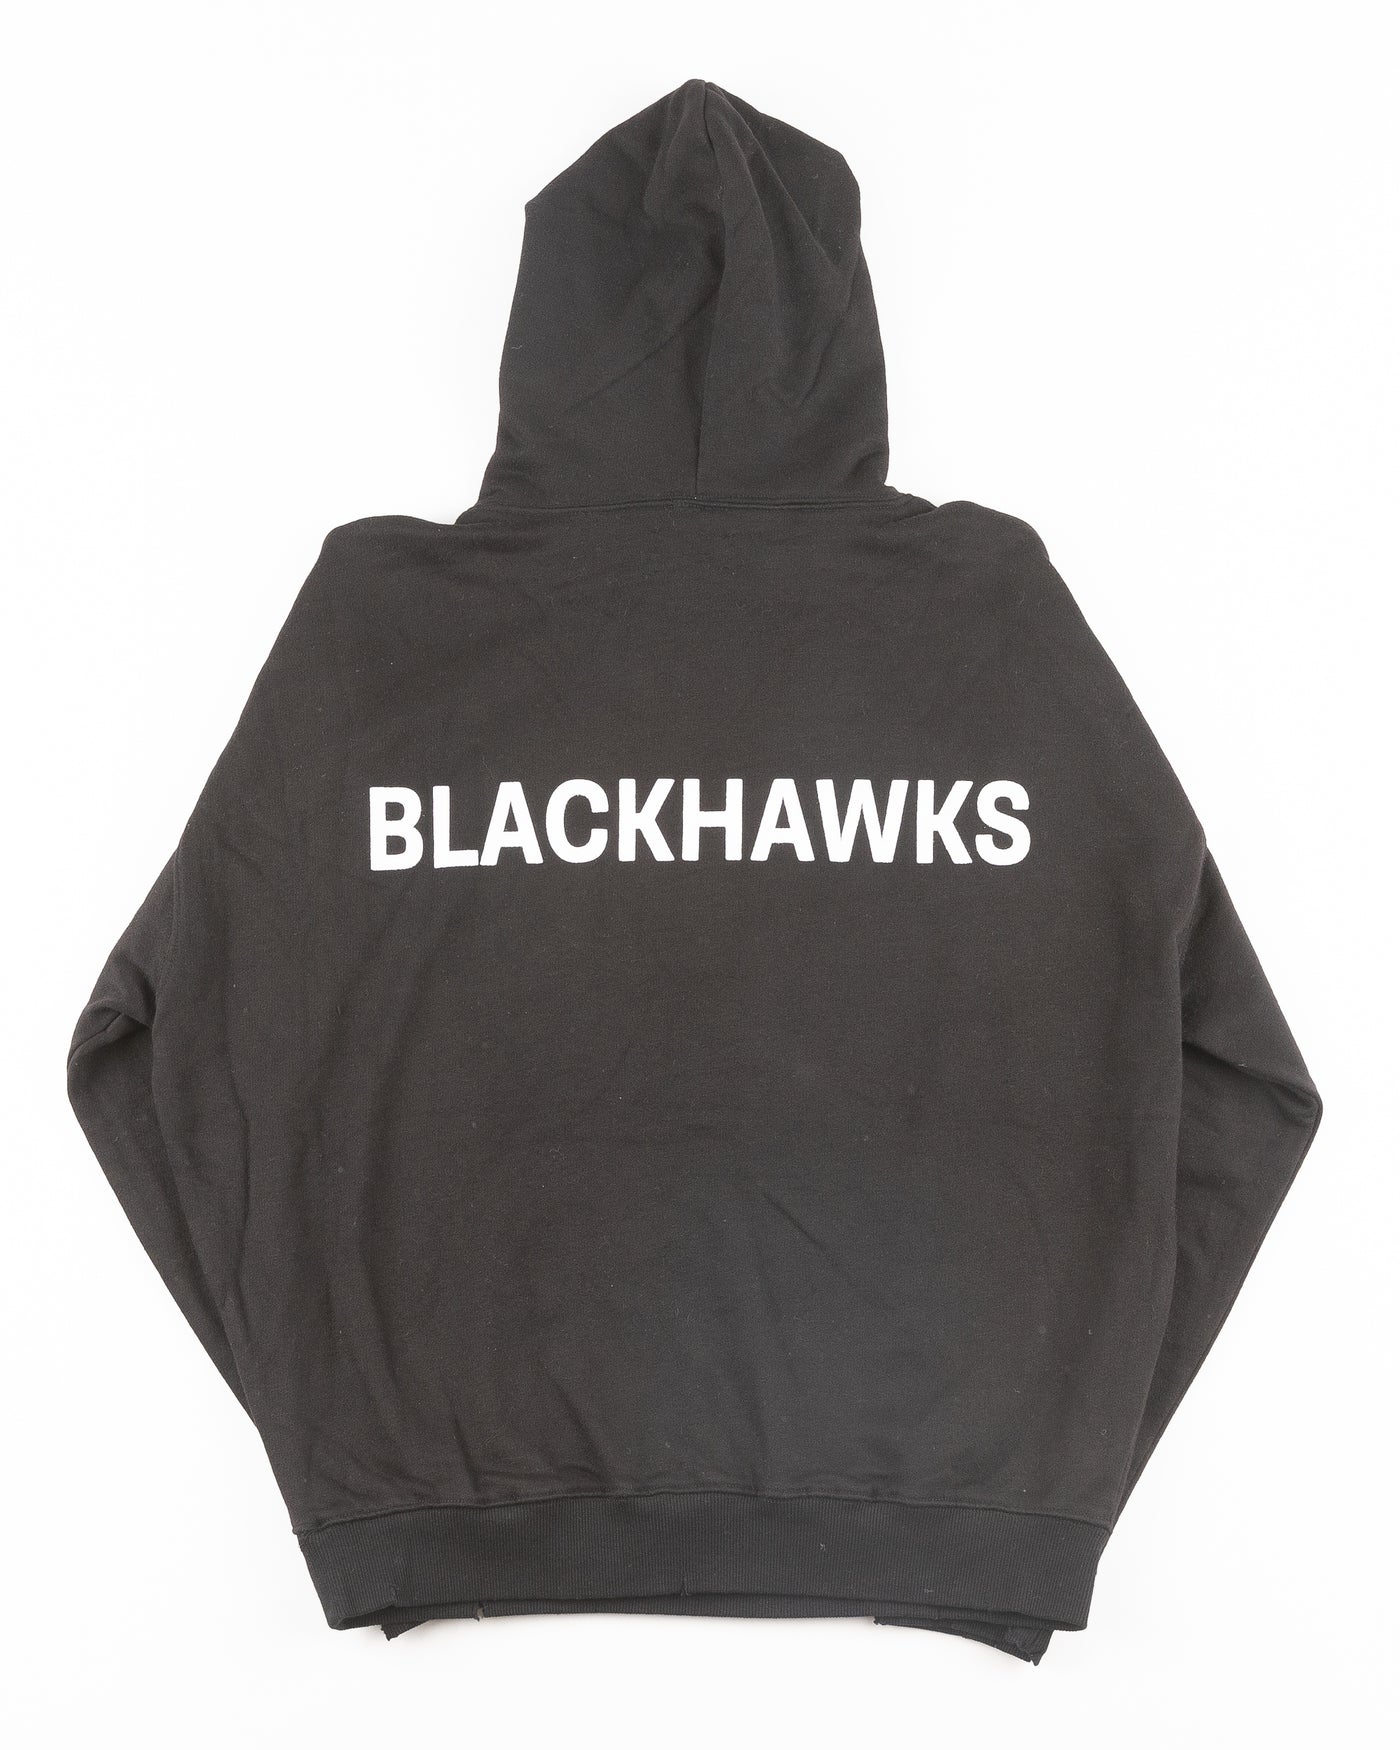 black Line Change hoodie with Chicago Blackhawks wordmark on front and back - back lay flat